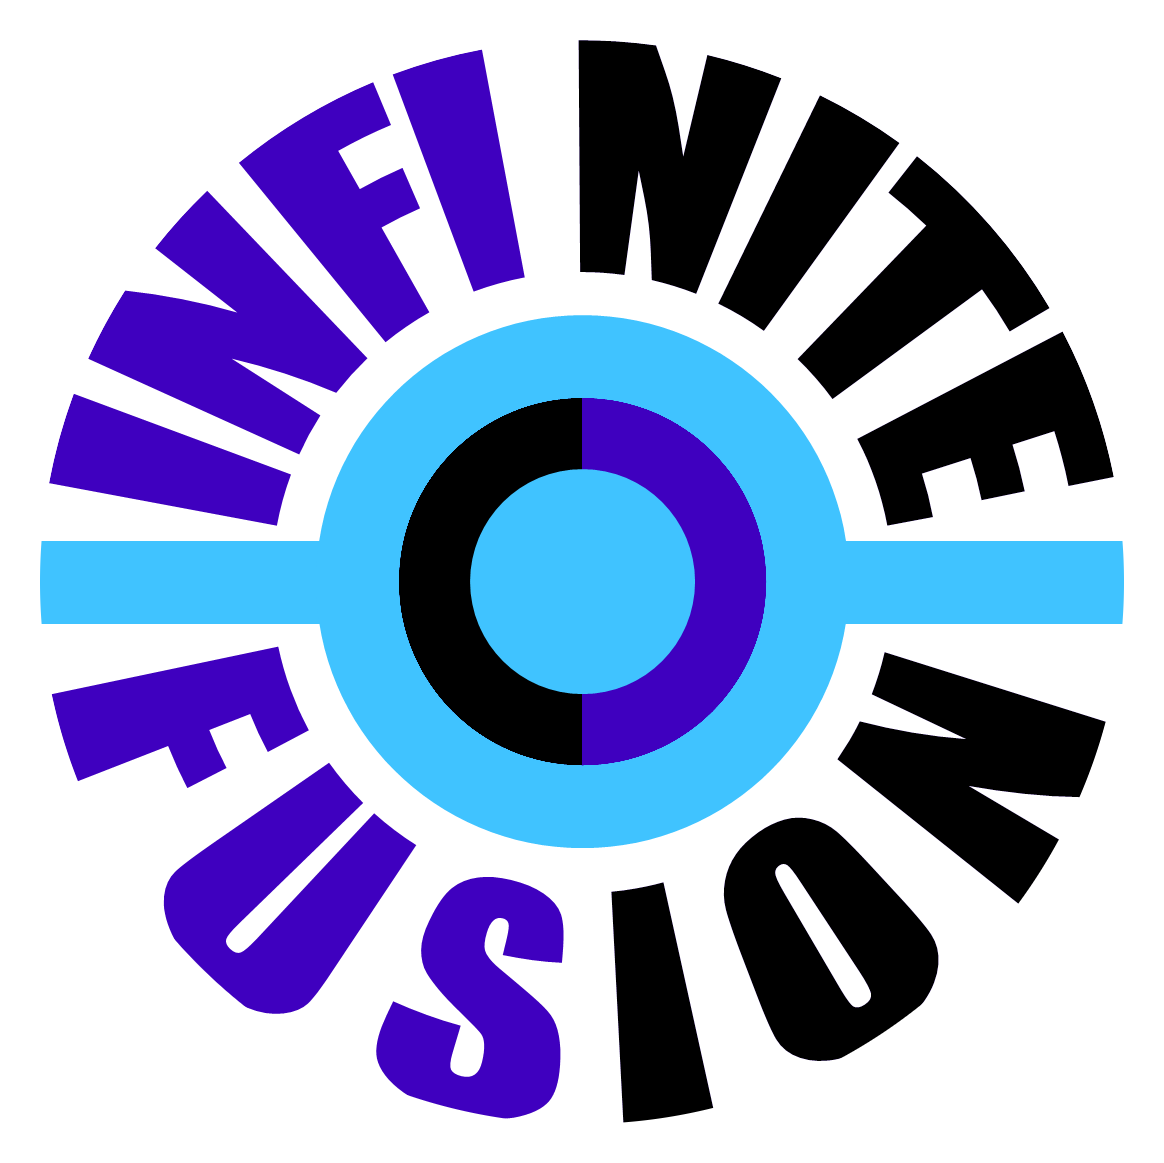 My logo for my Infinite Fusion stream series.  It features the title Infinite Fusion arranged based on the custom ball sprite I use in game.